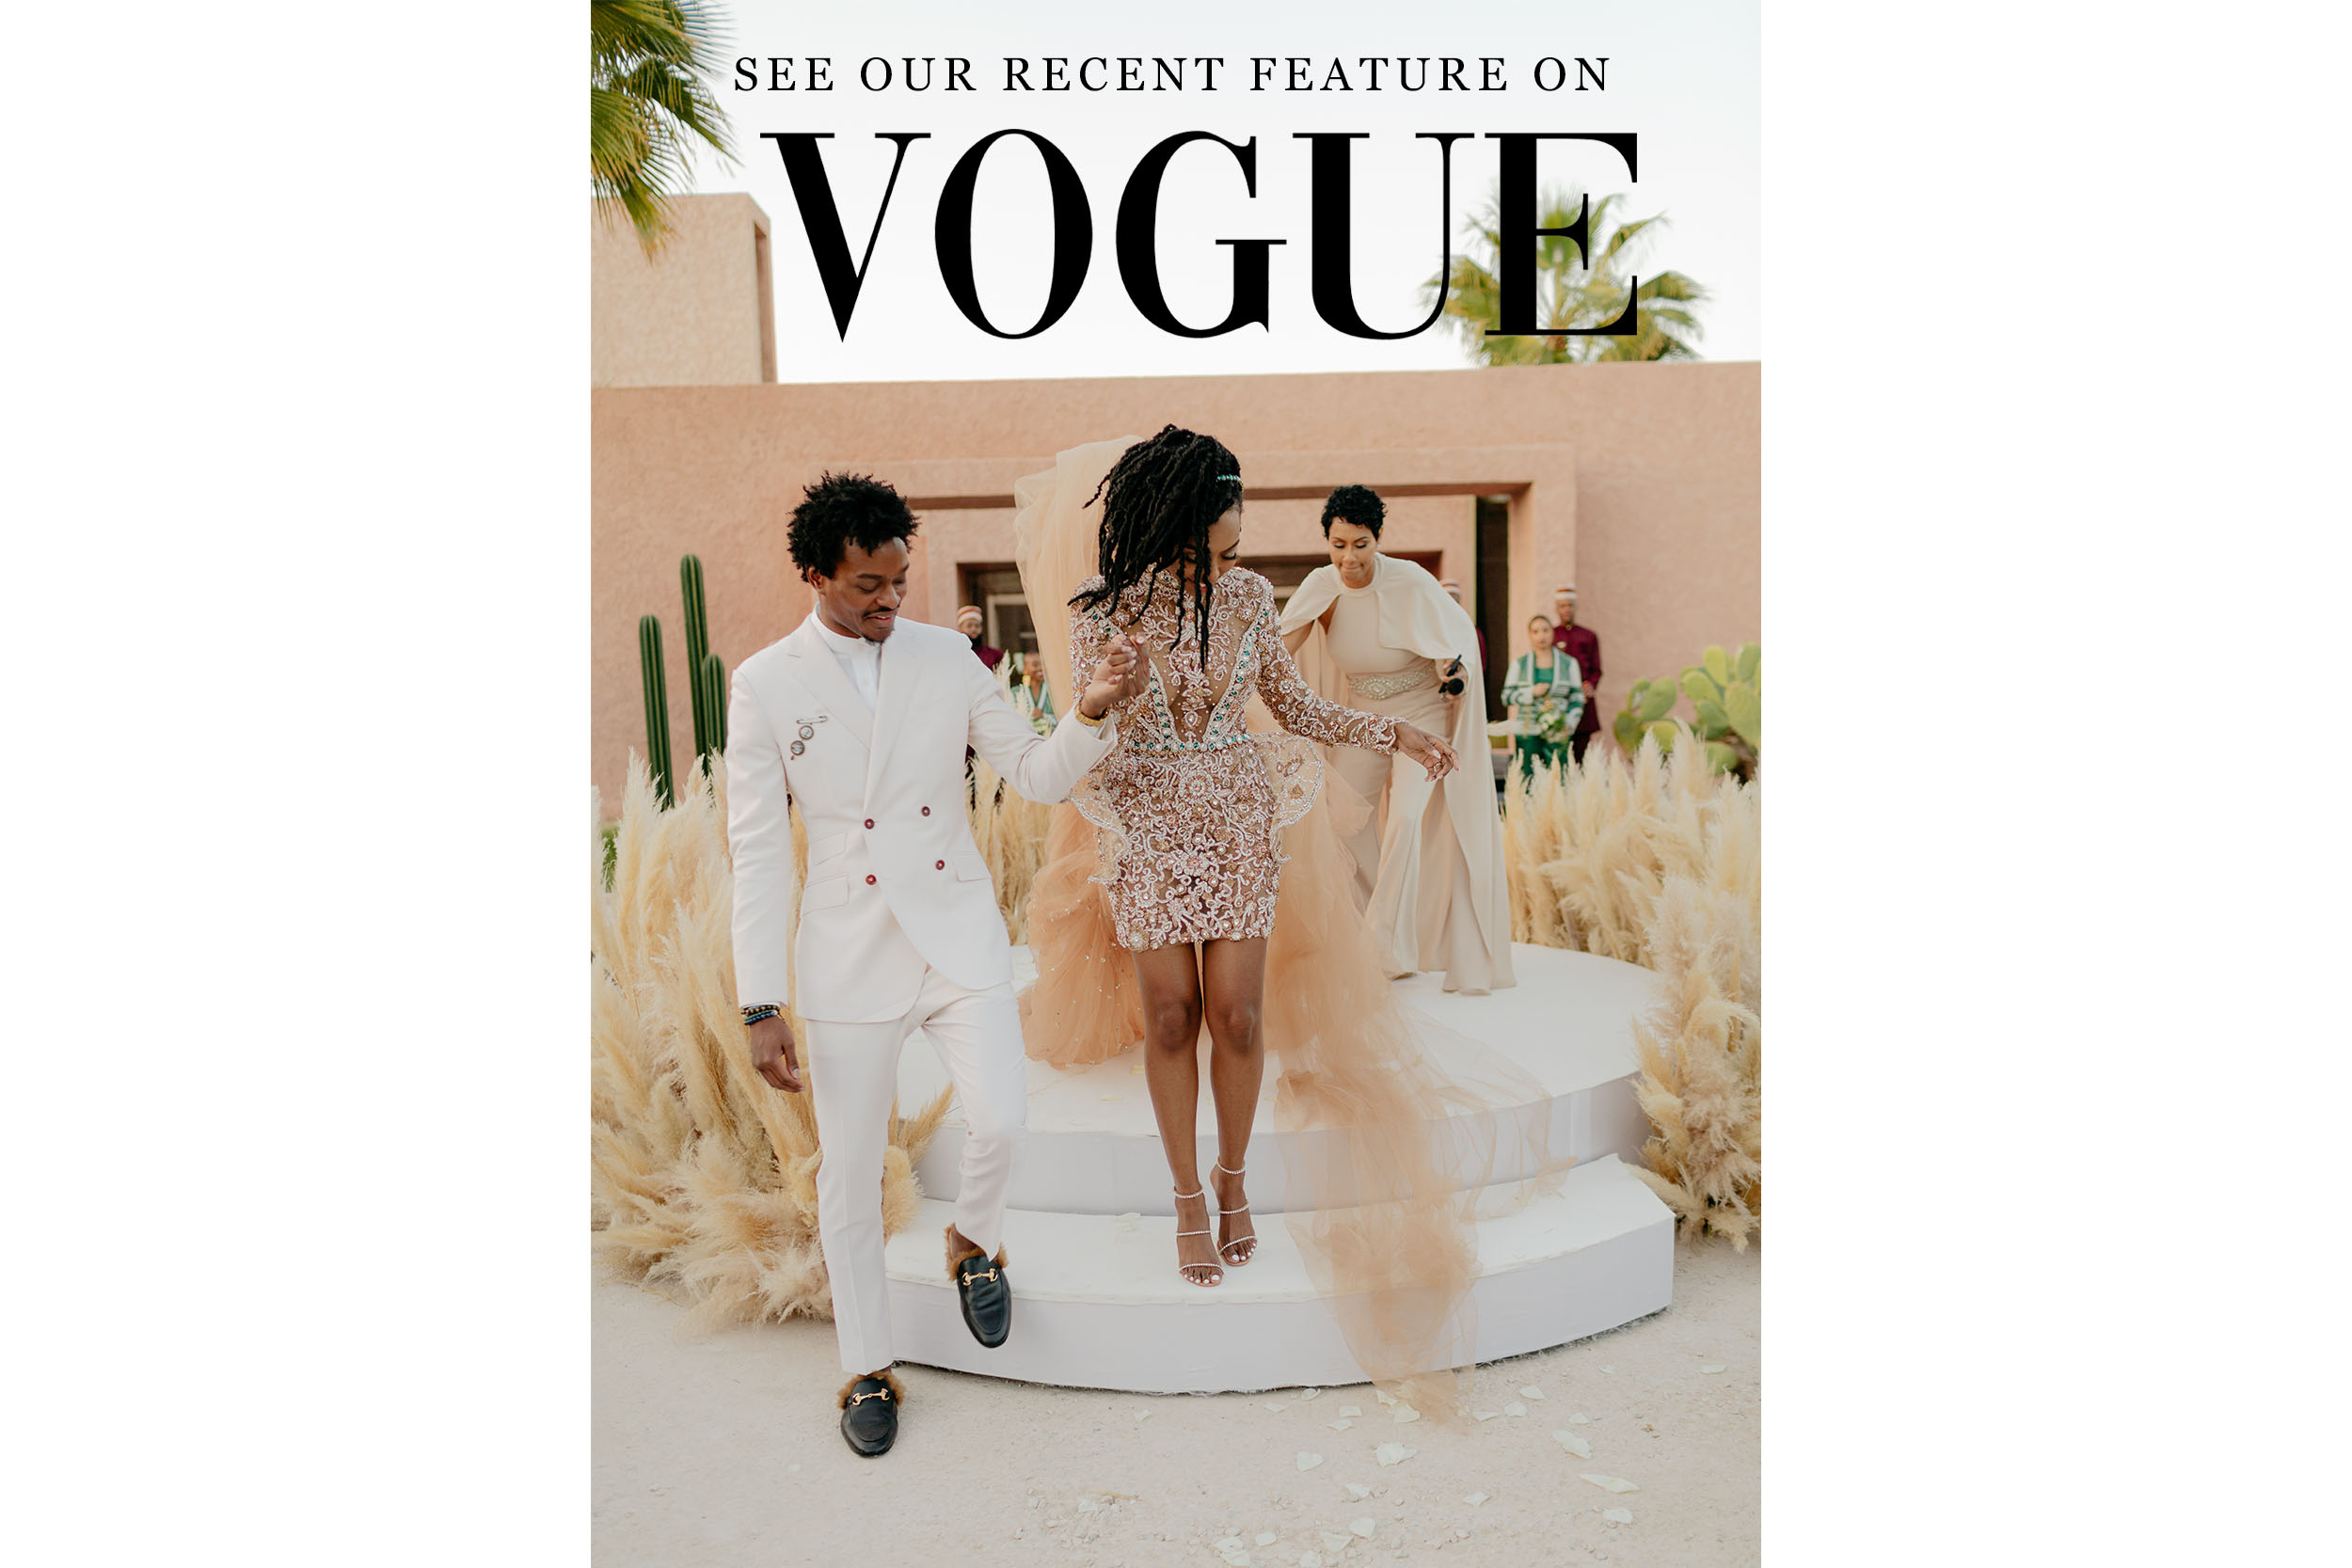 Tori Elizabeth and Keegan Phillips Wedding Ceremony on Vogue with Michelle Scott Photography